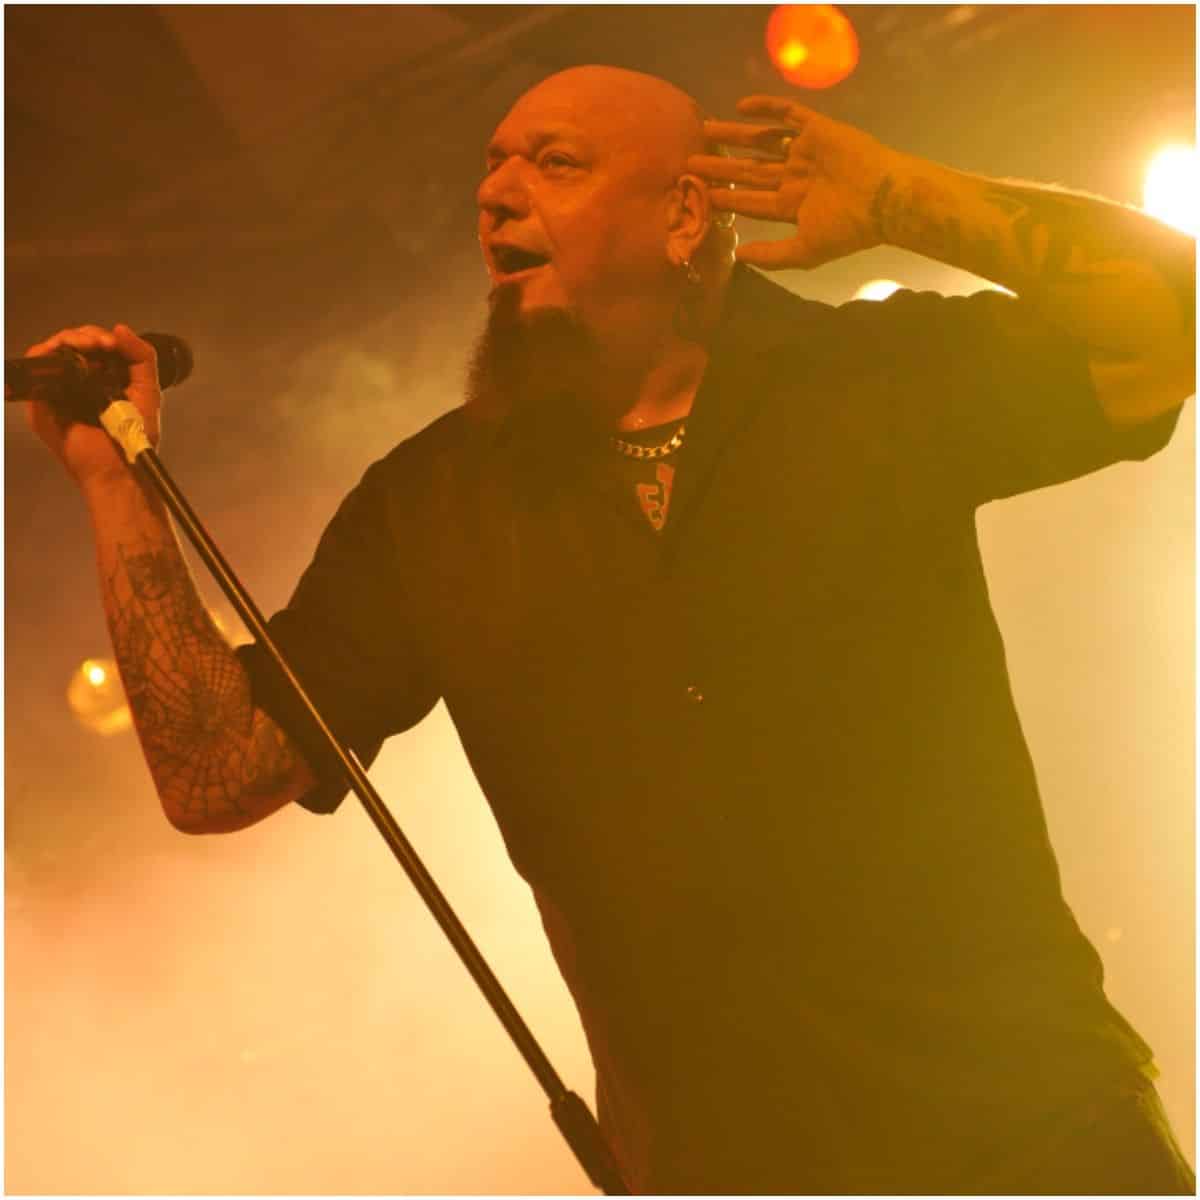 what is the net worth of Paul Di'Anno